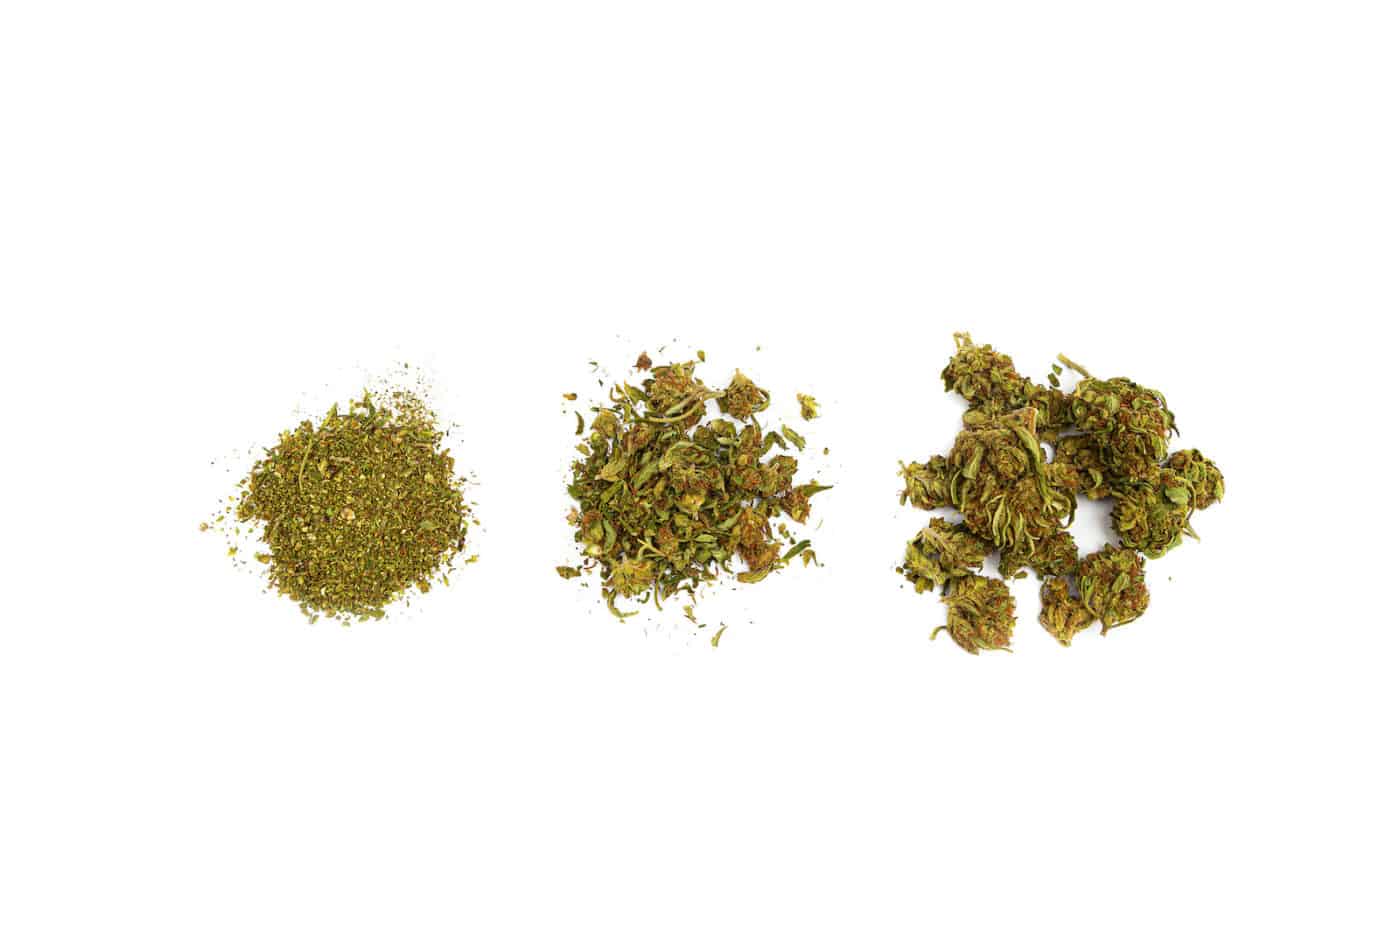 Does Cannabis Need to be Decarboxylated?